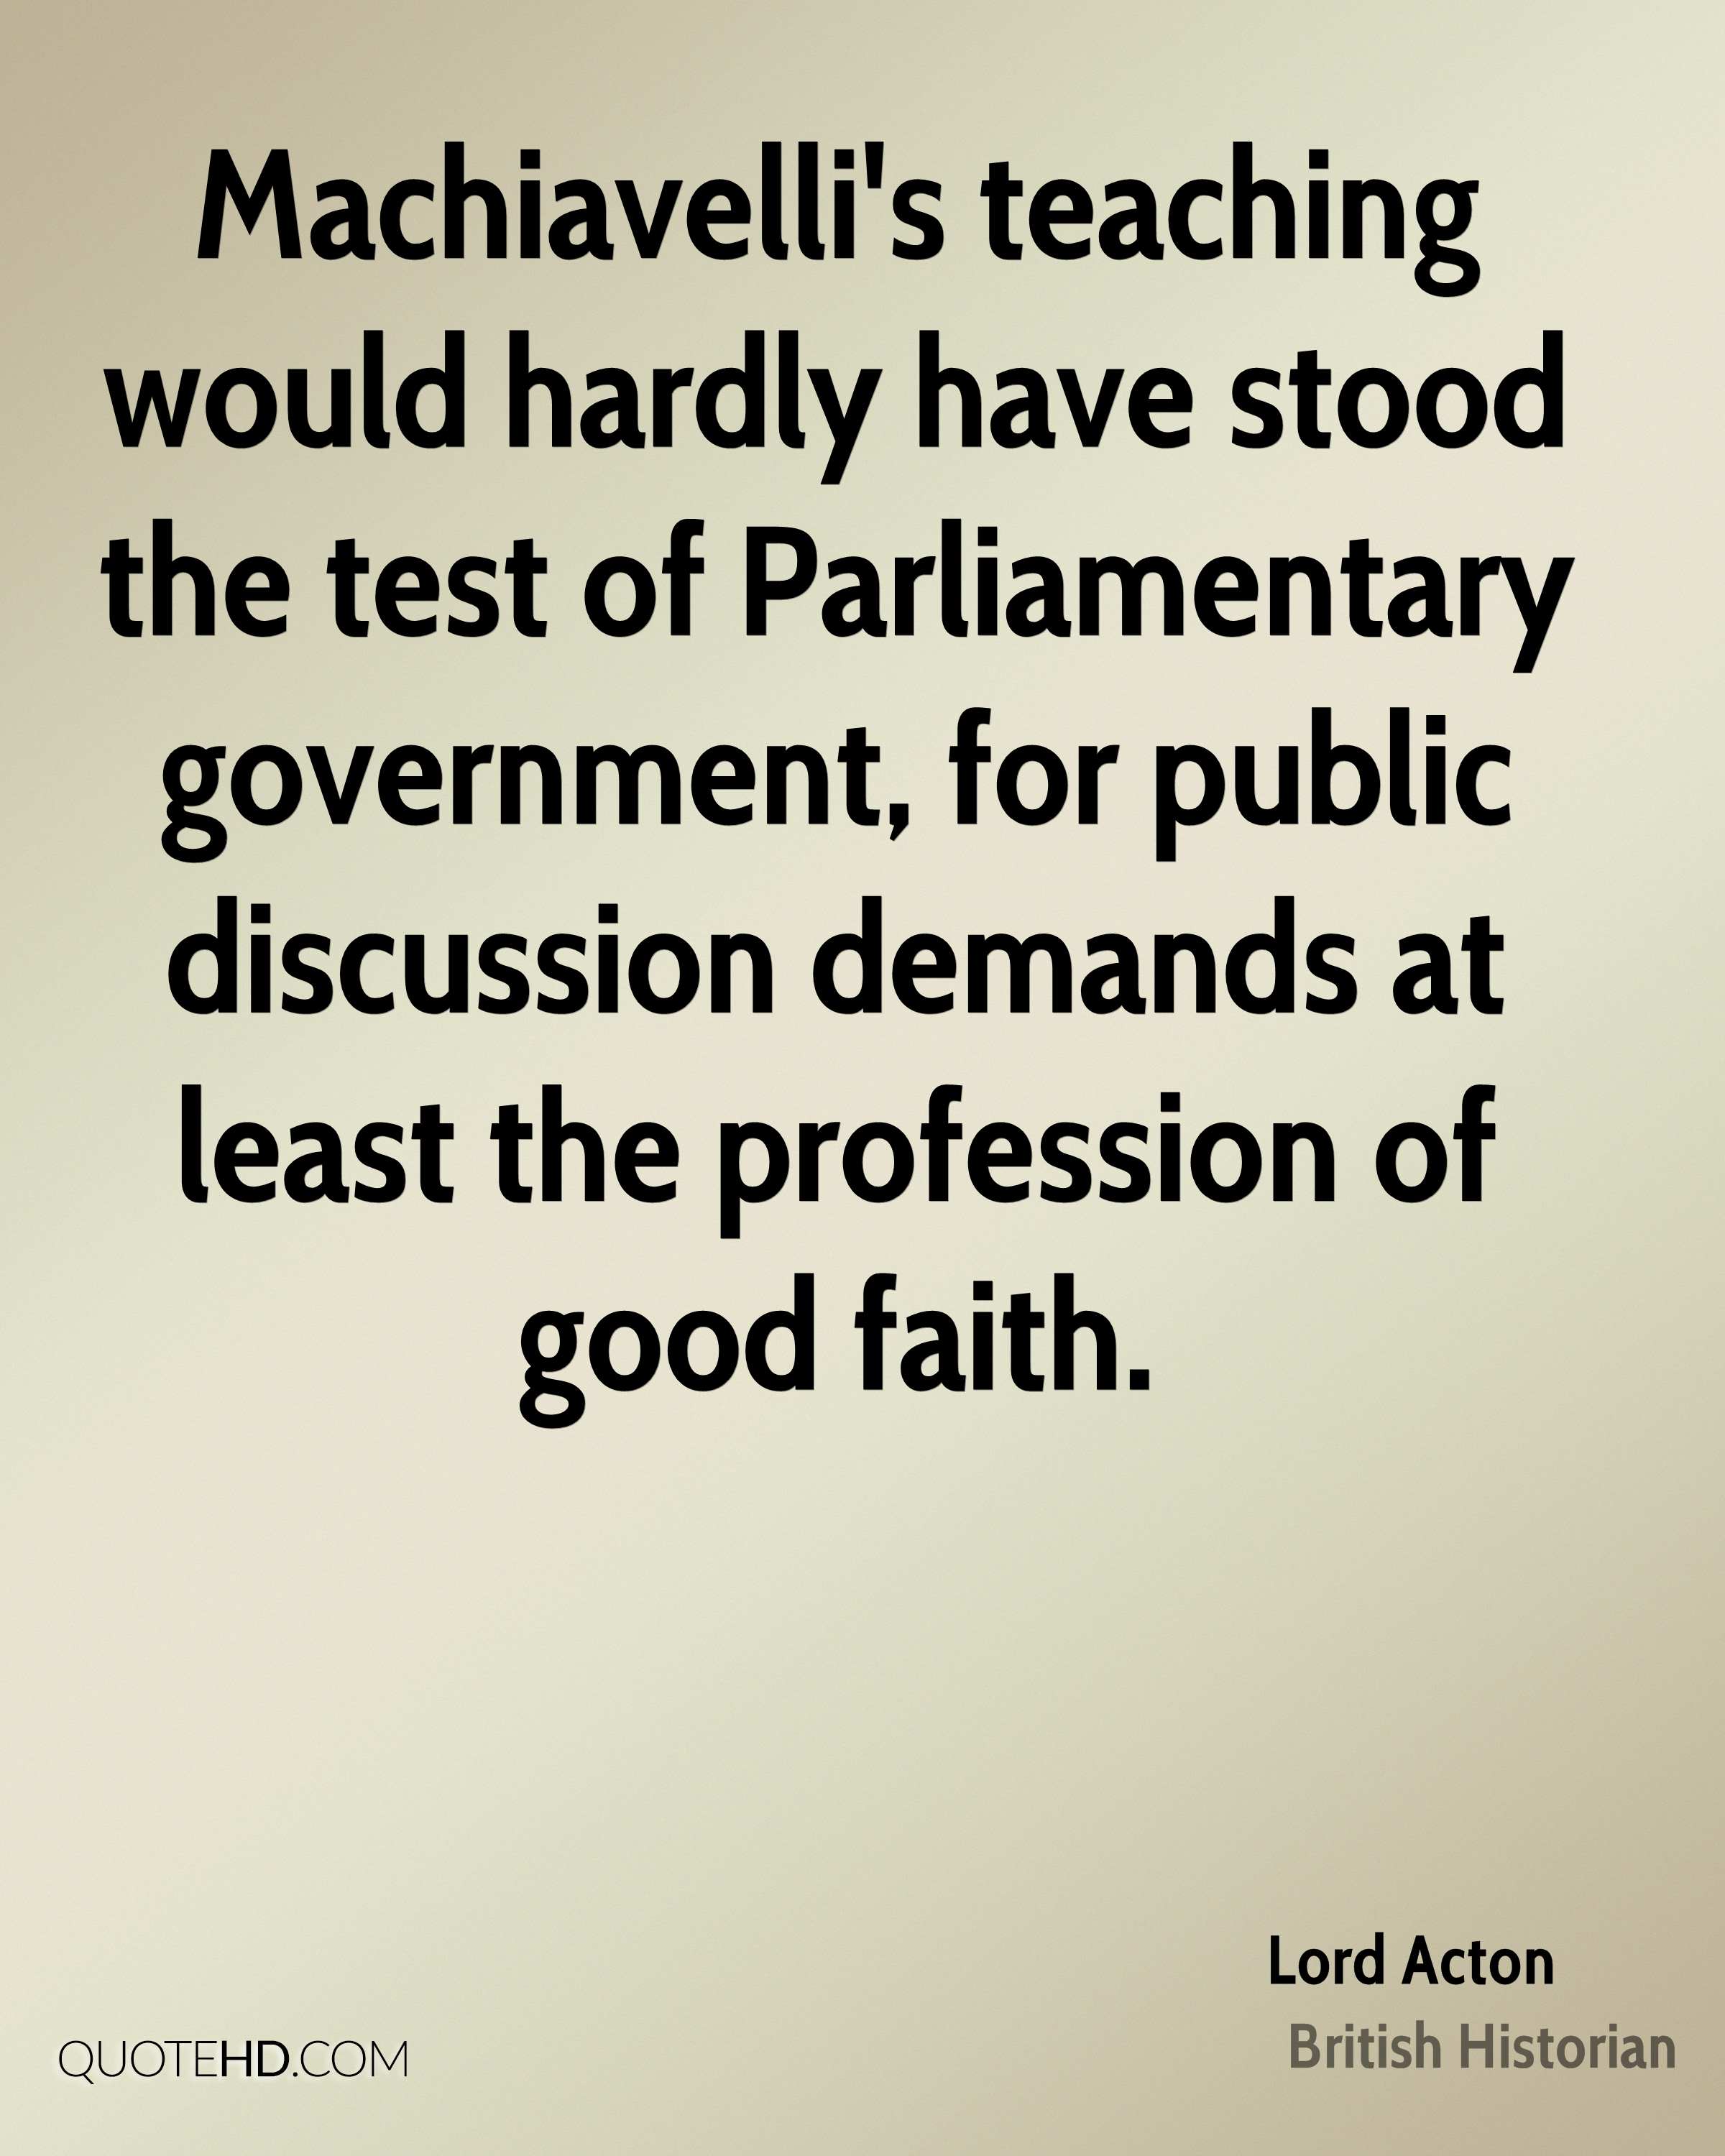 Machiavelli's teaching would hardly have stood the test of Parliamentary government, for public discussion demands.. Lord Acton